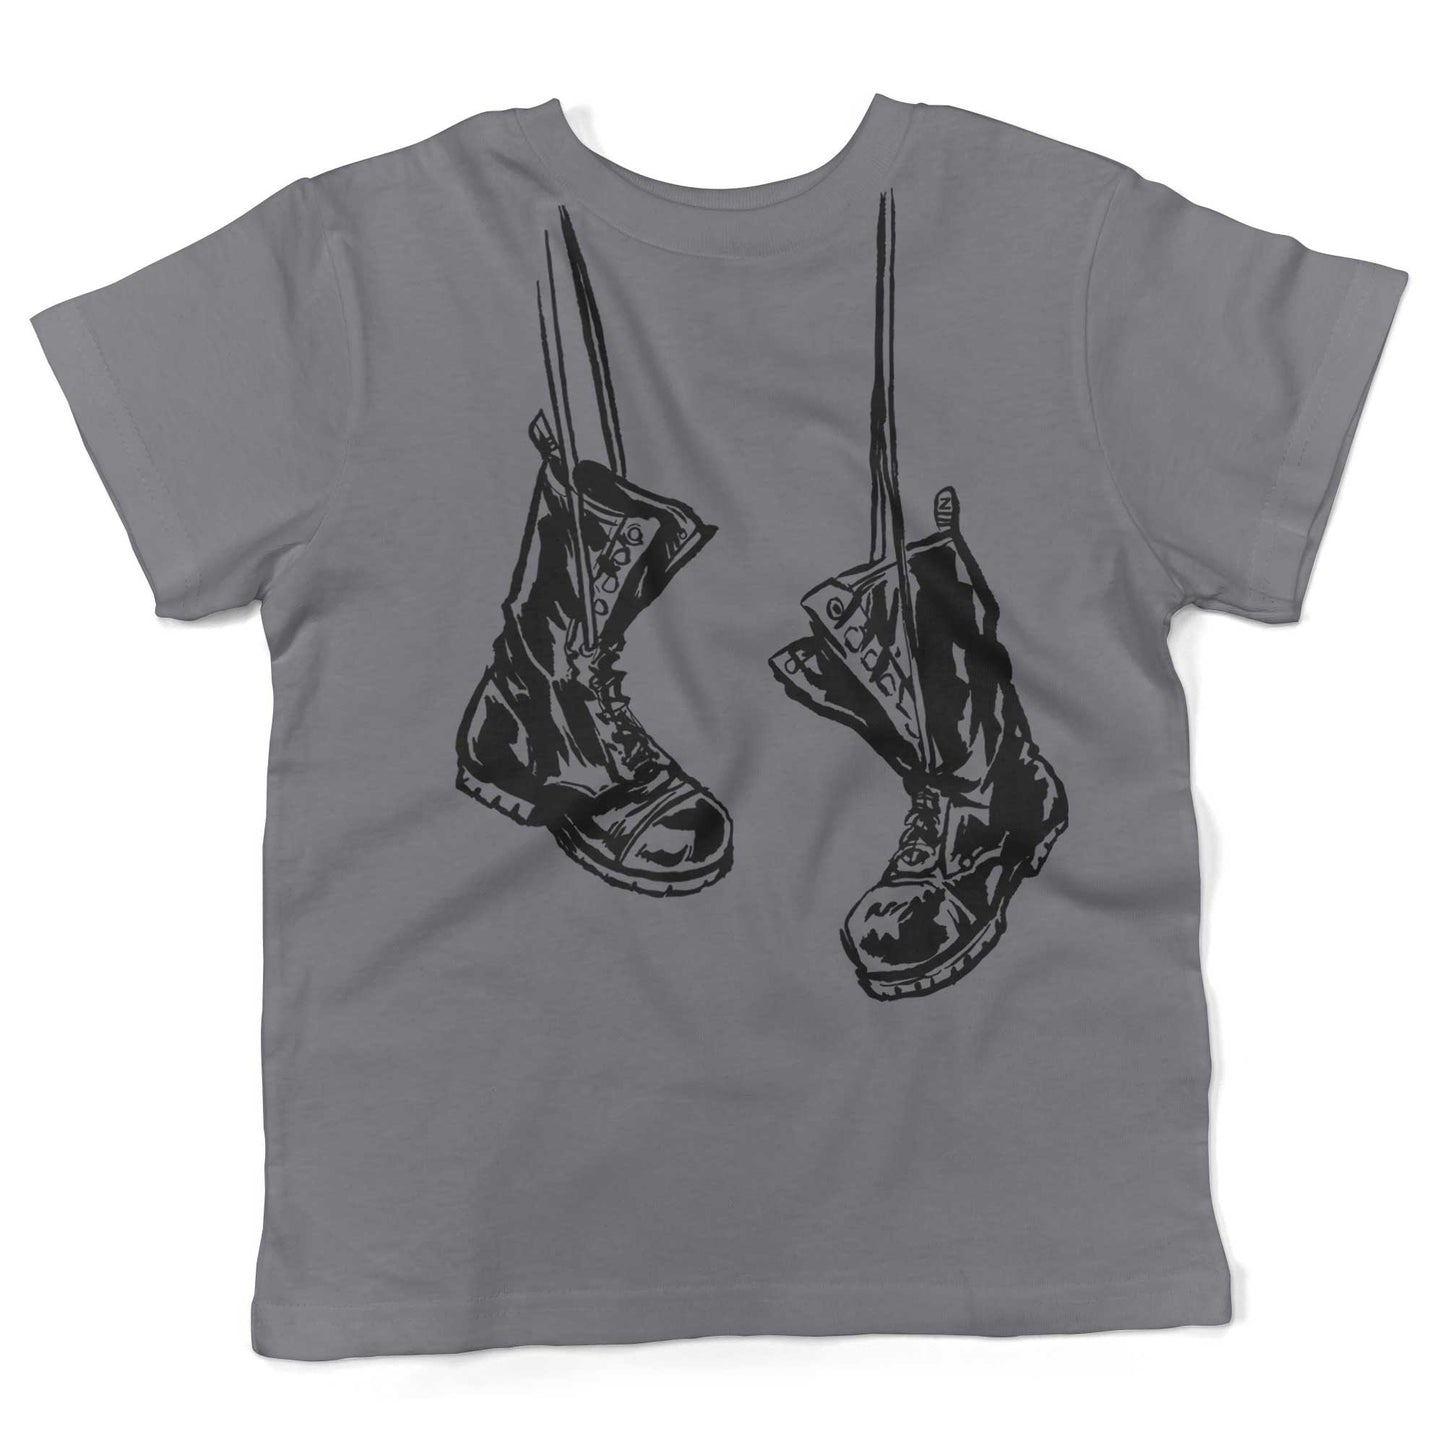 Baby Combat Boots Toddler Shirt-White/Black-2T